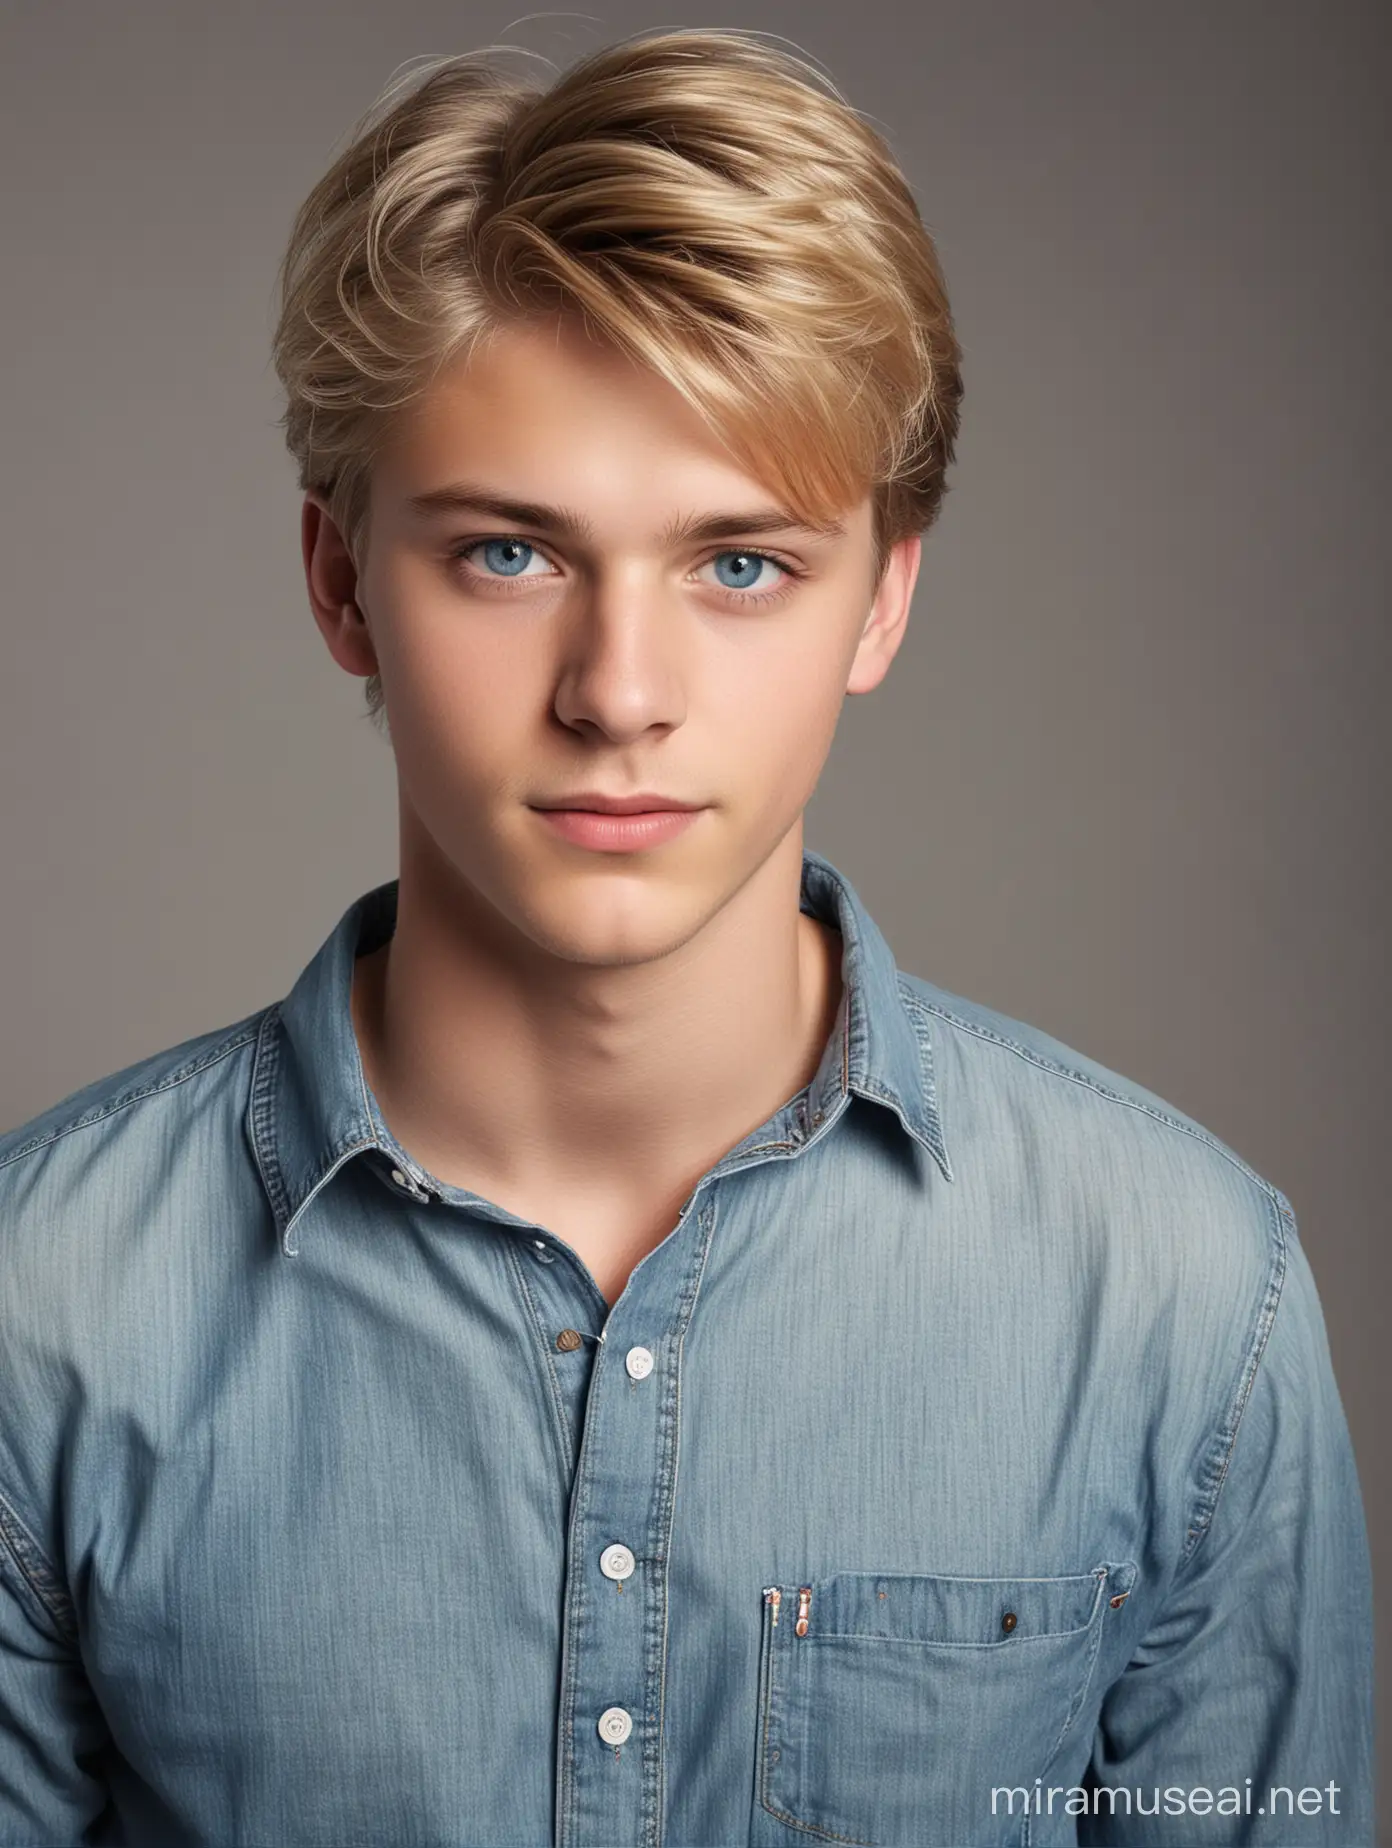 Blond hair and blue eyes 19 years old handsome boy wearing a long sleeve shirt with a denim.